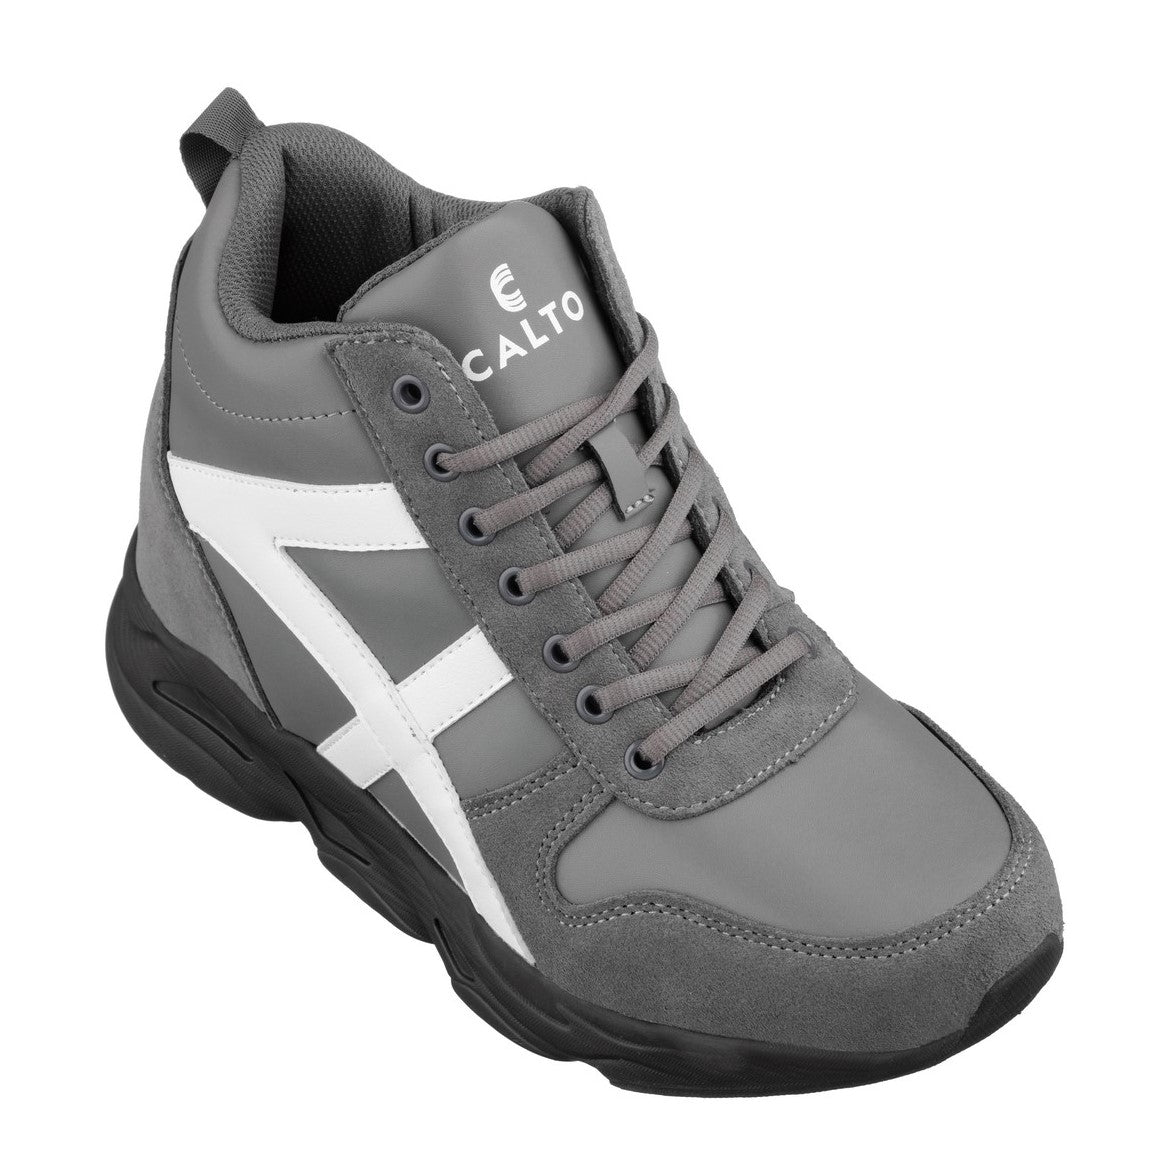 Elevator shoes height increase CALTO - S22781 - 3.6 Inches Taller (Grey/White) - Hiking Style Boots